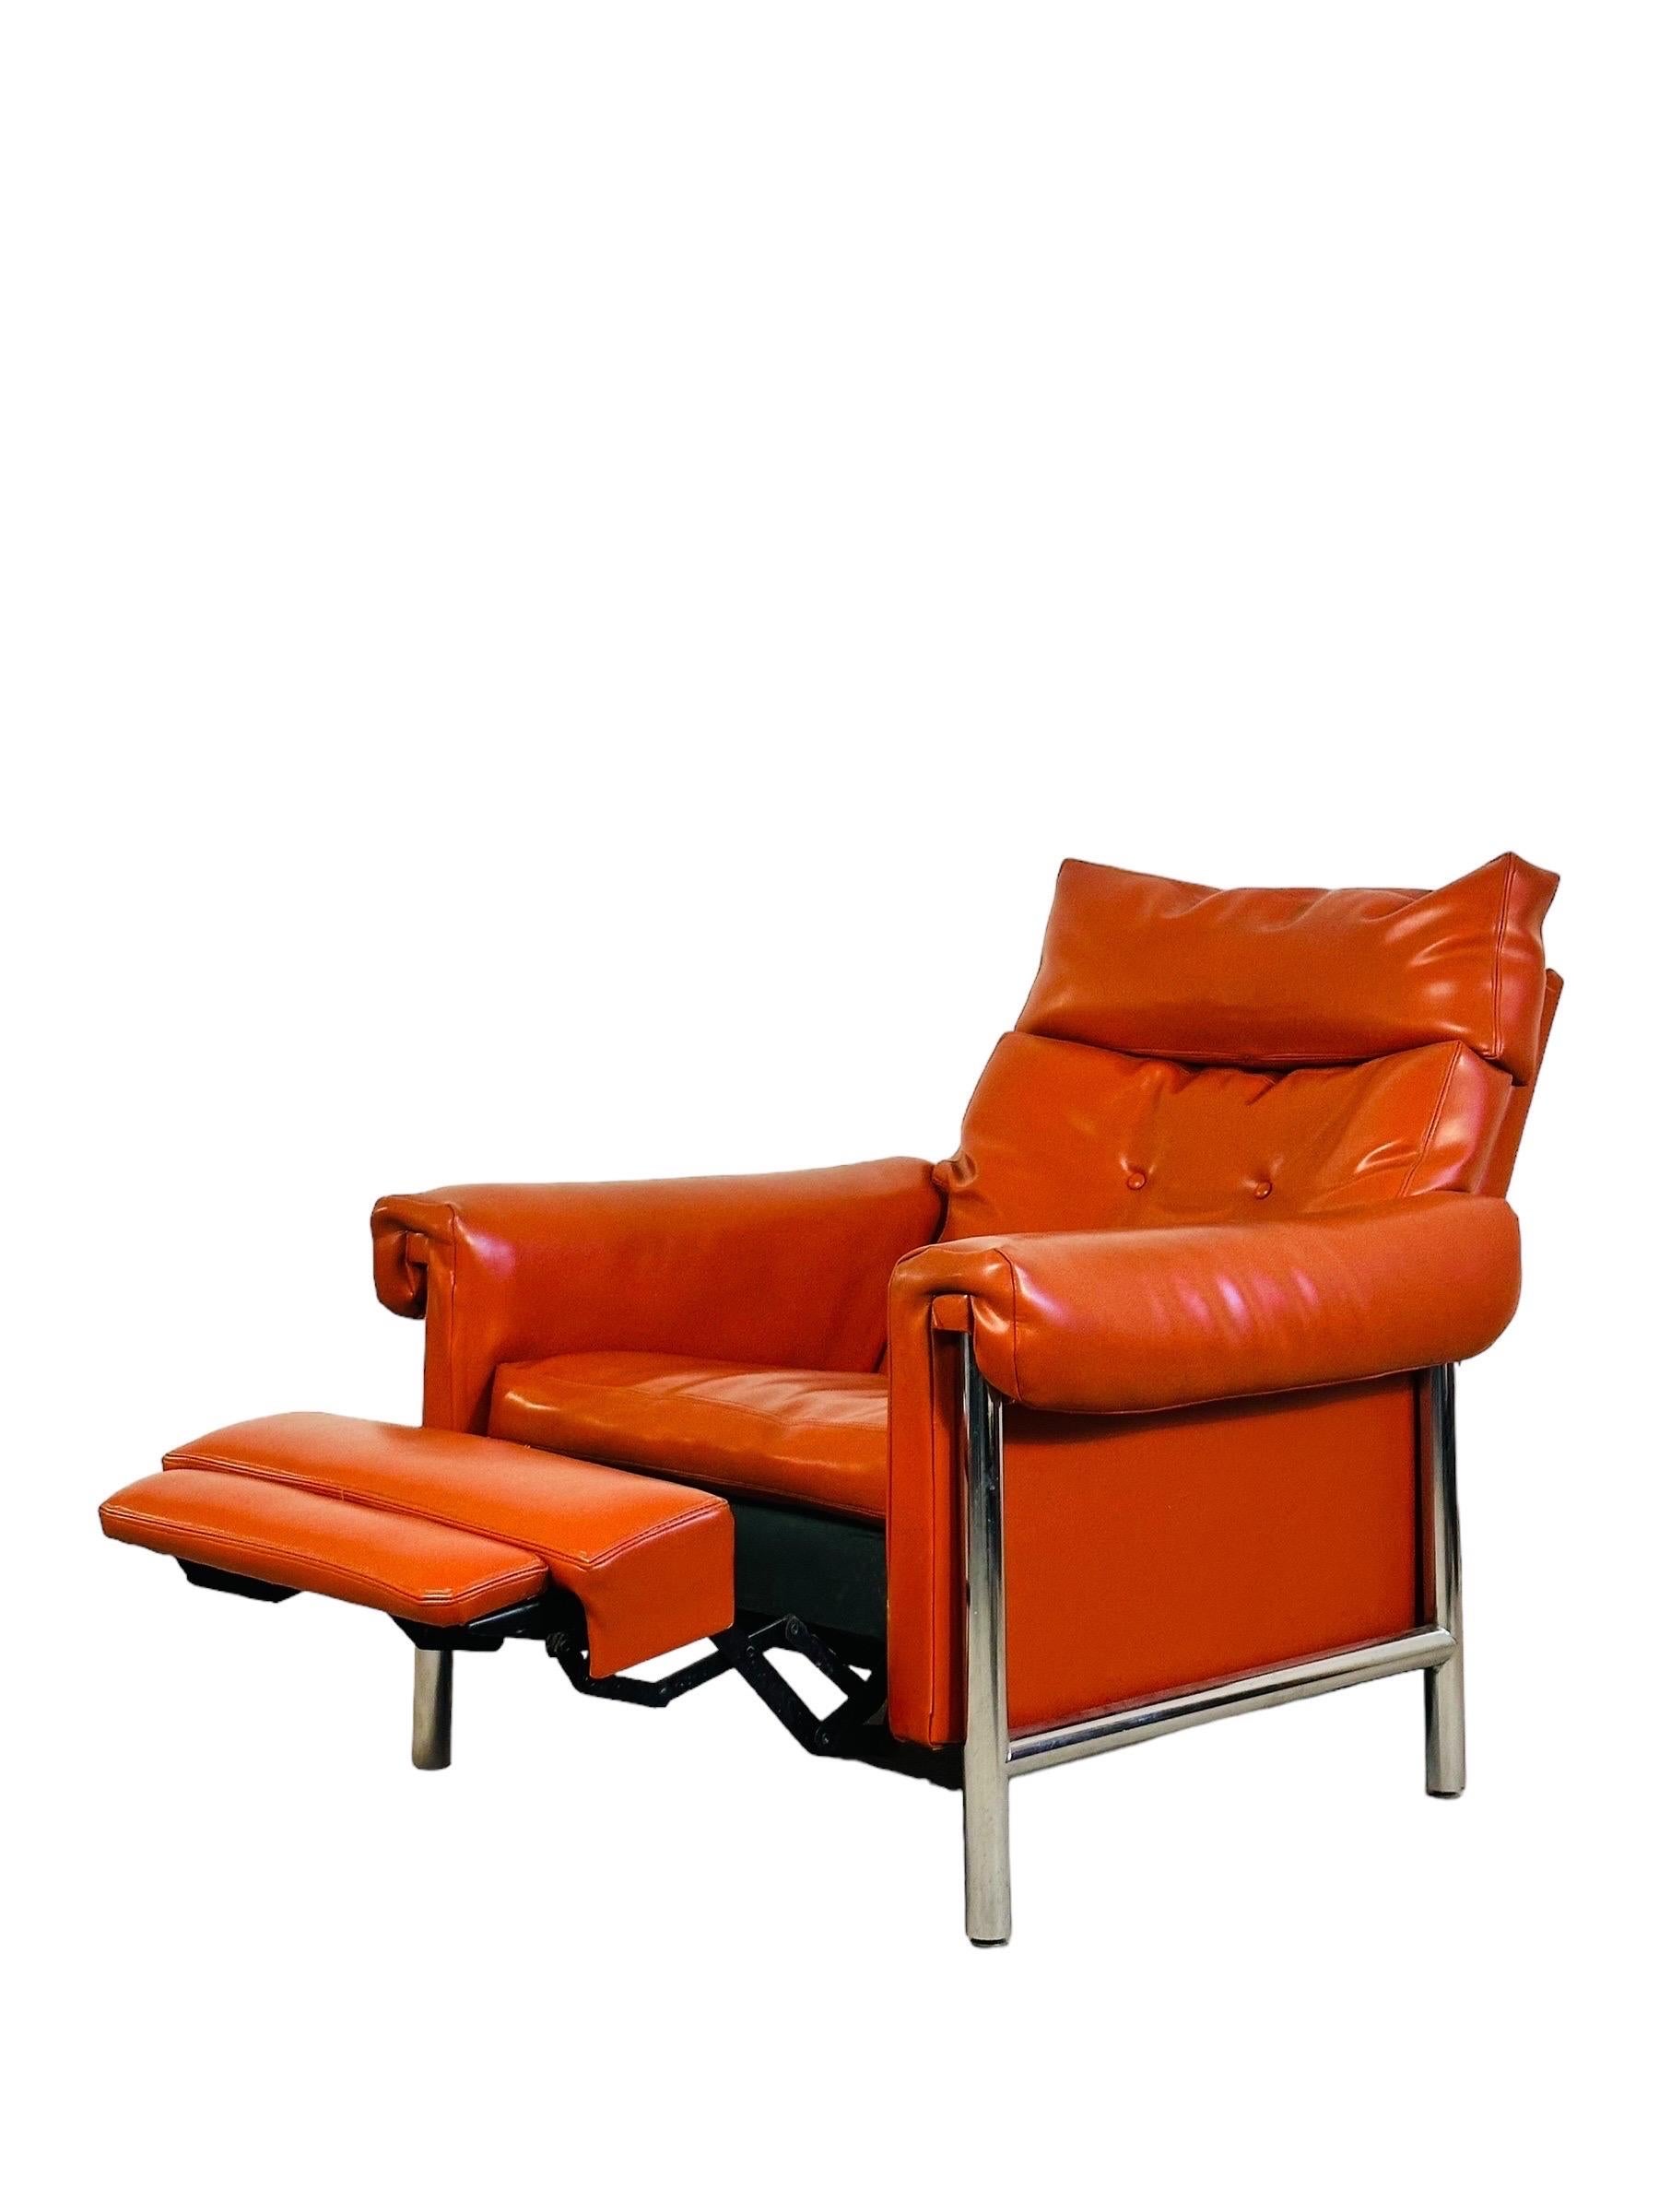 Mid-Century Modern Mid Century Modern Chrome Recliner Lounge Chair For Sale